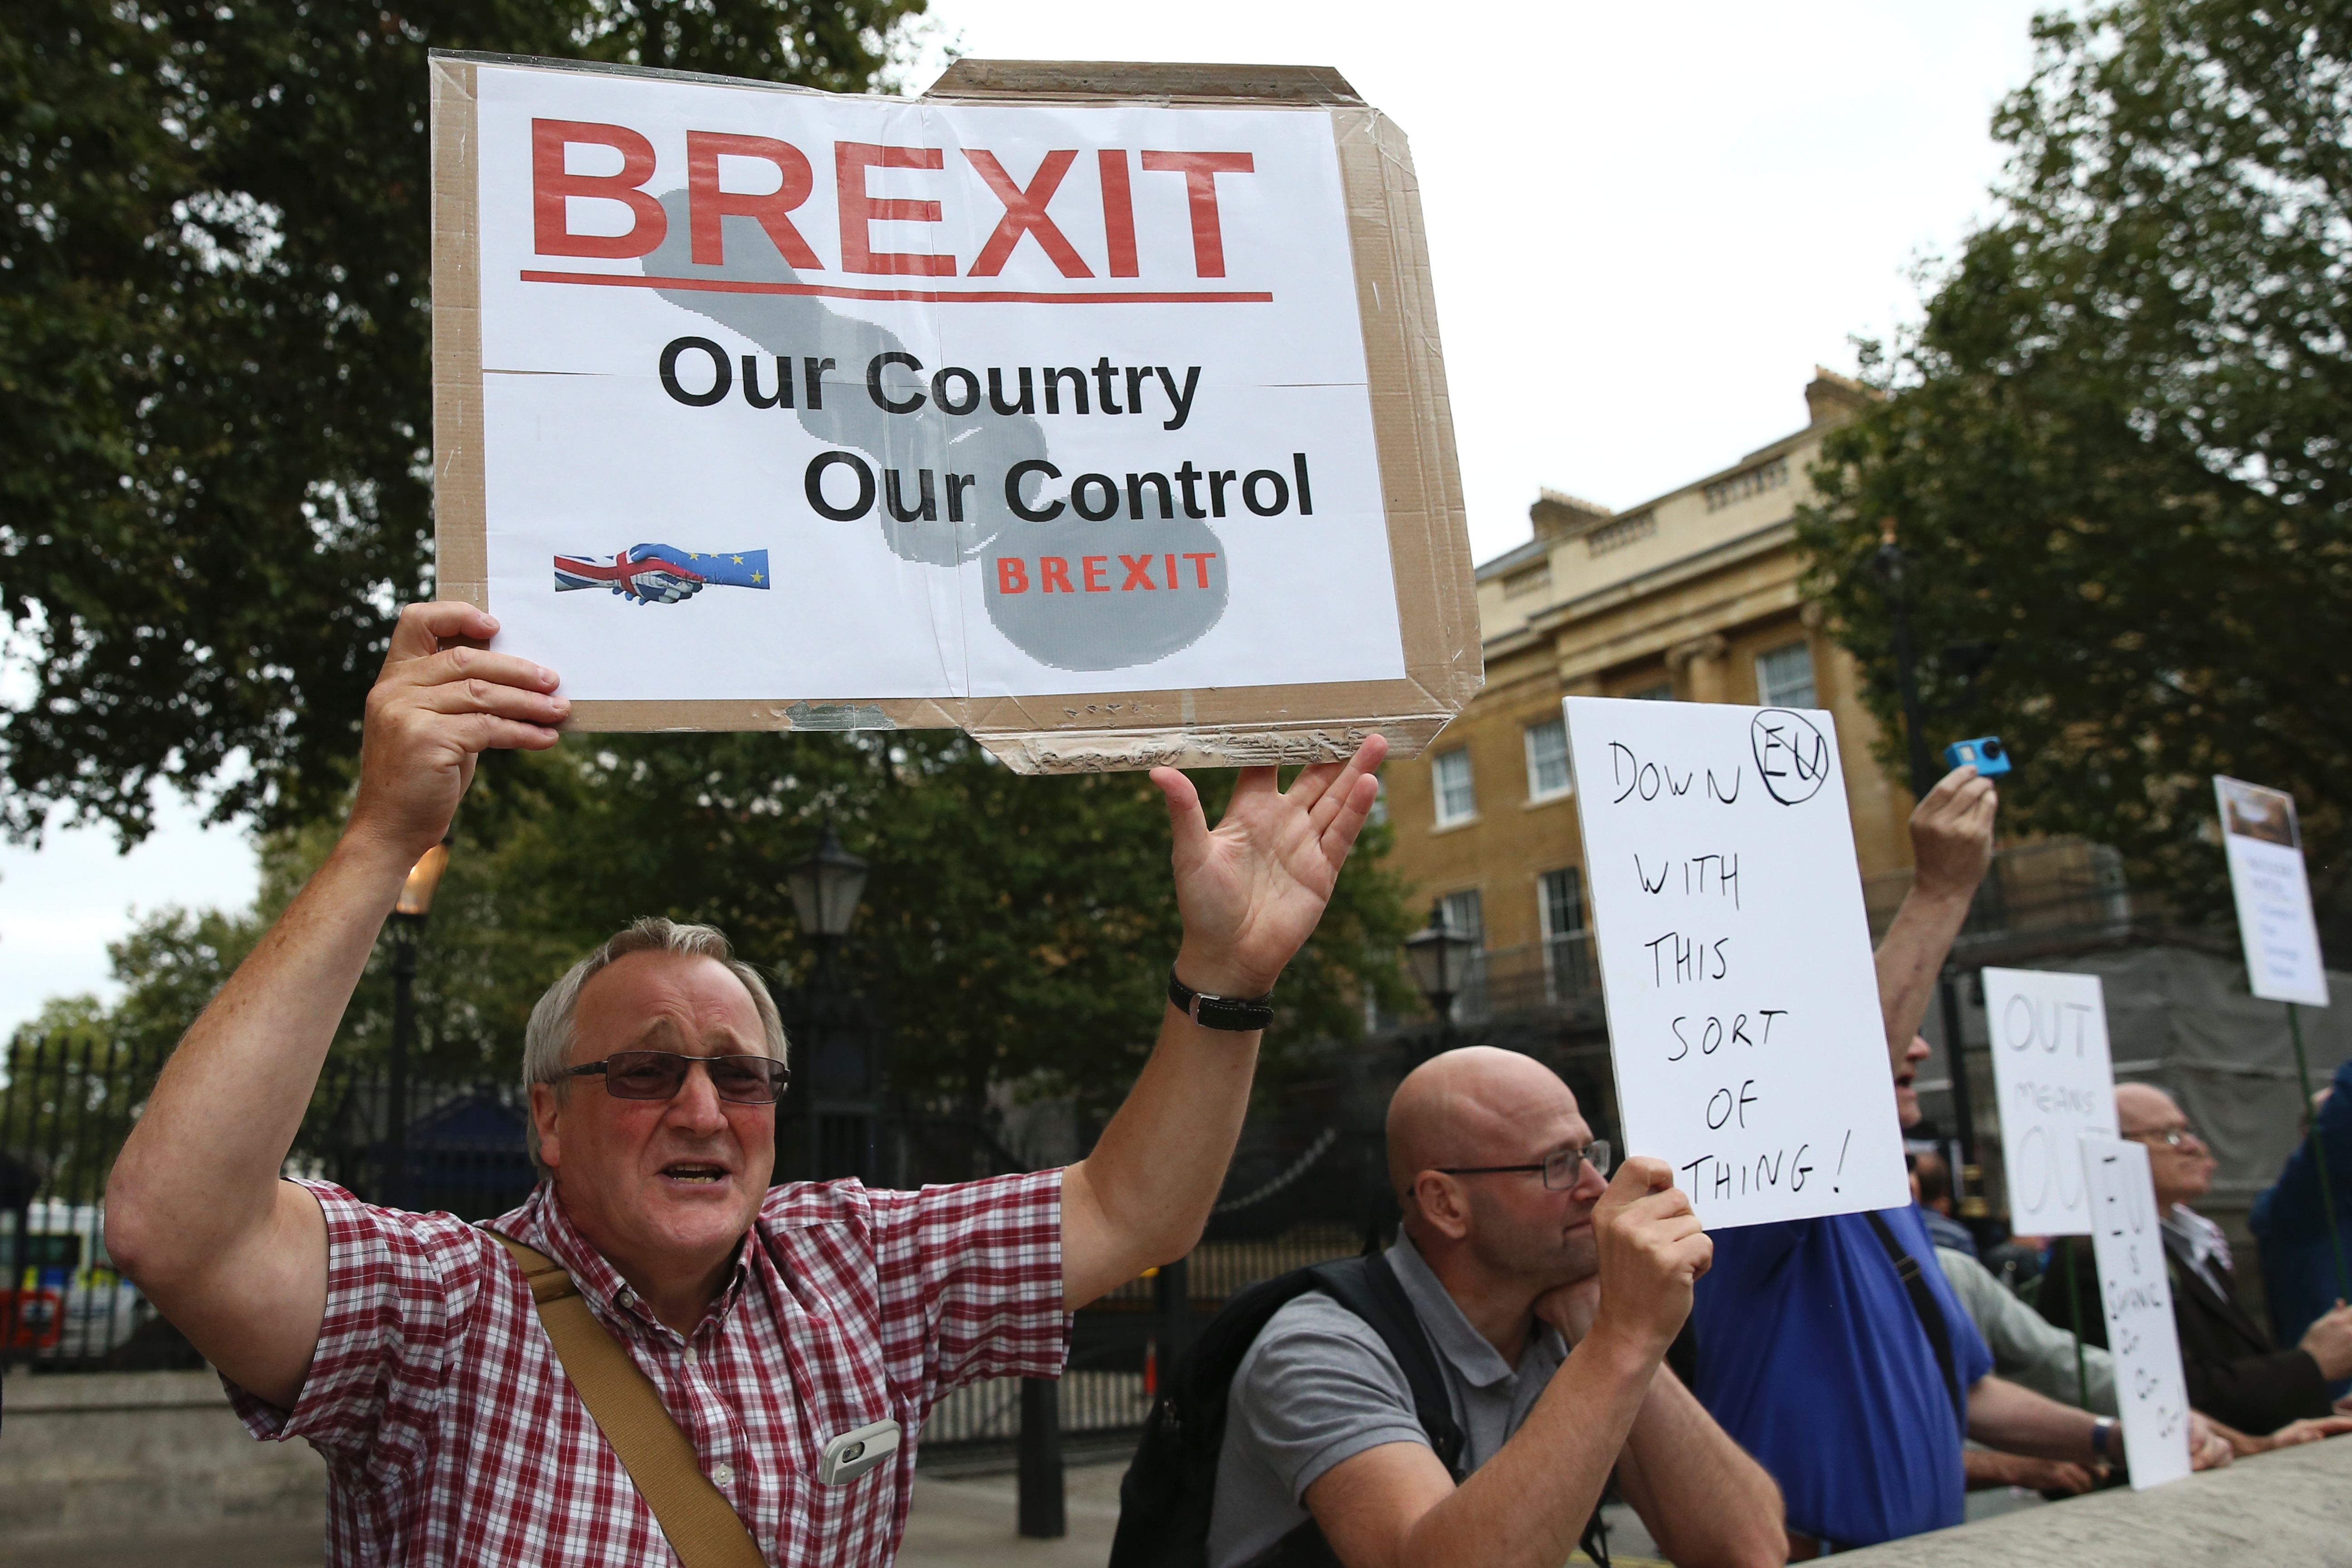 A man carrying an anti-EU pro-Brexit placard joins a counter protest against pro-Europe marchers on a March for Europe demonstration against the Brexit vote in Parliament Square in central London on September 3, 2016.